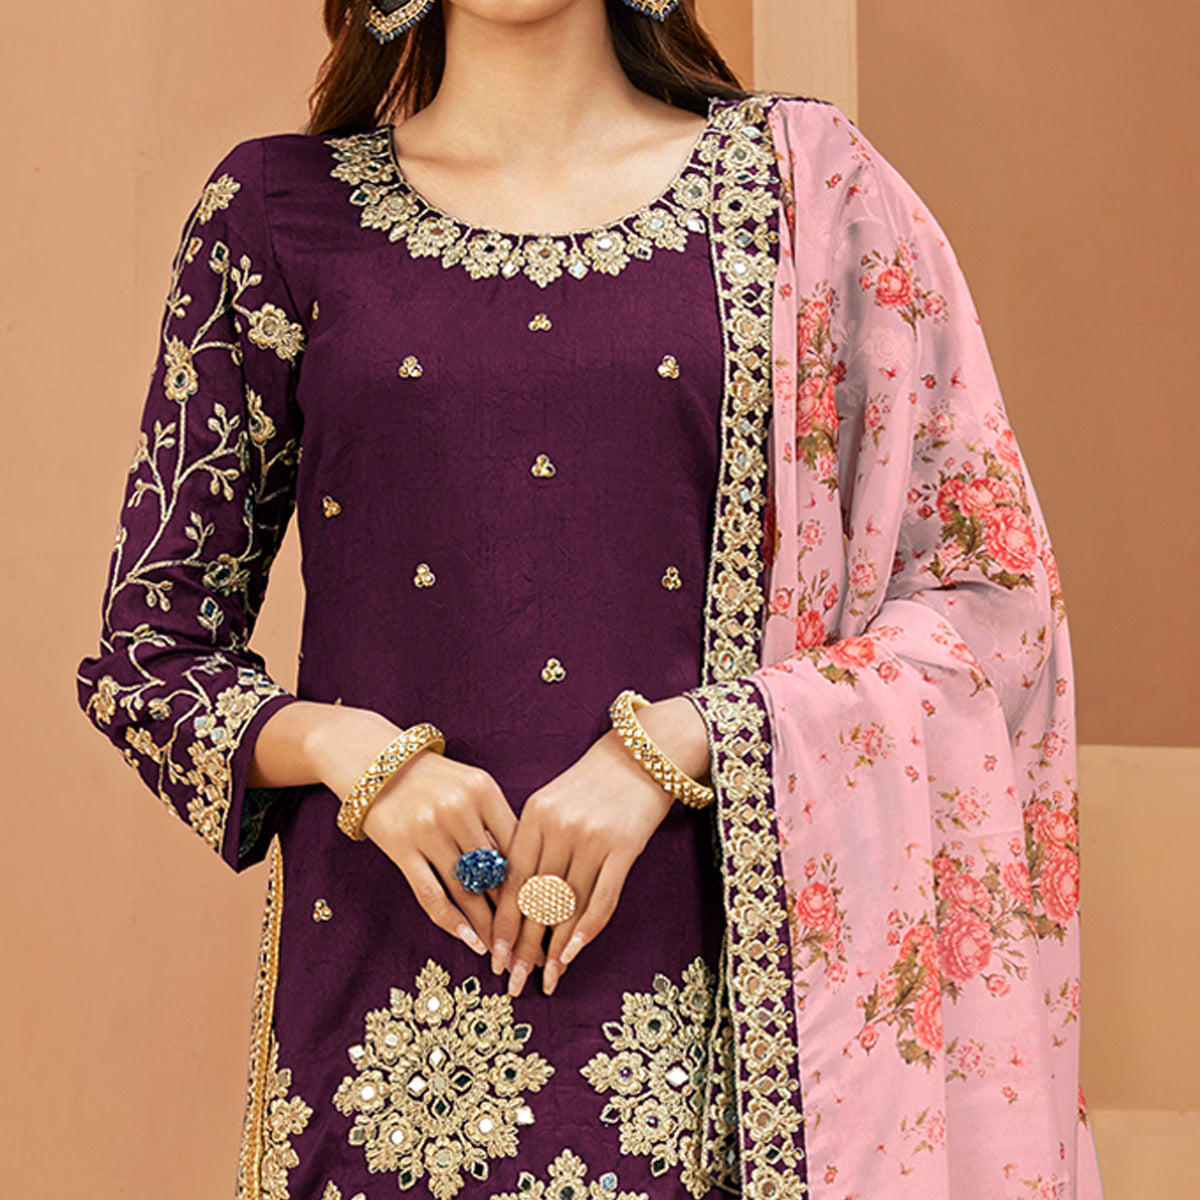 Purple Floral Embroidered Art Silk Semi Stitched Patiala Suit